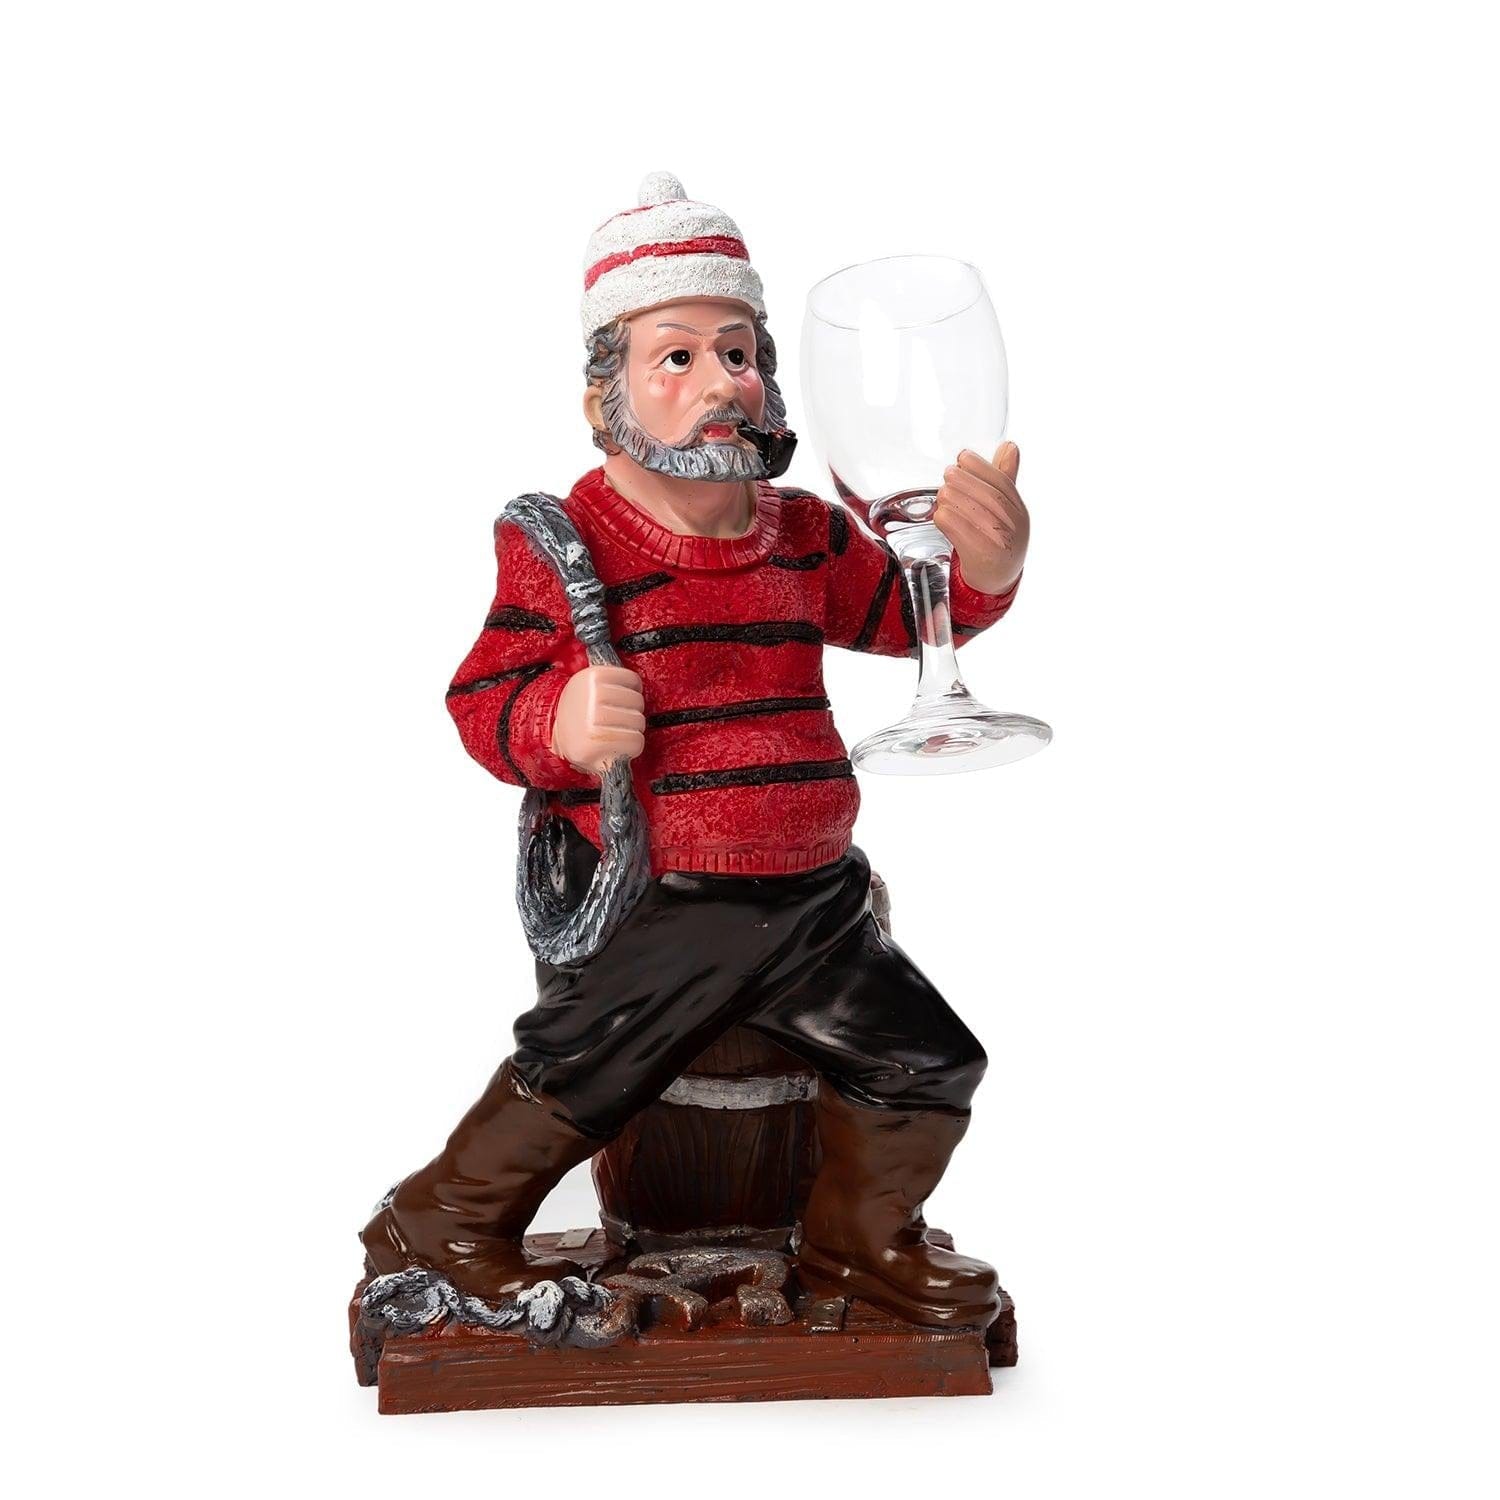 Nautical Winter Sailor Figurine Resin Bottle Holder with 1 Wine Glass Set (Red Shirt)